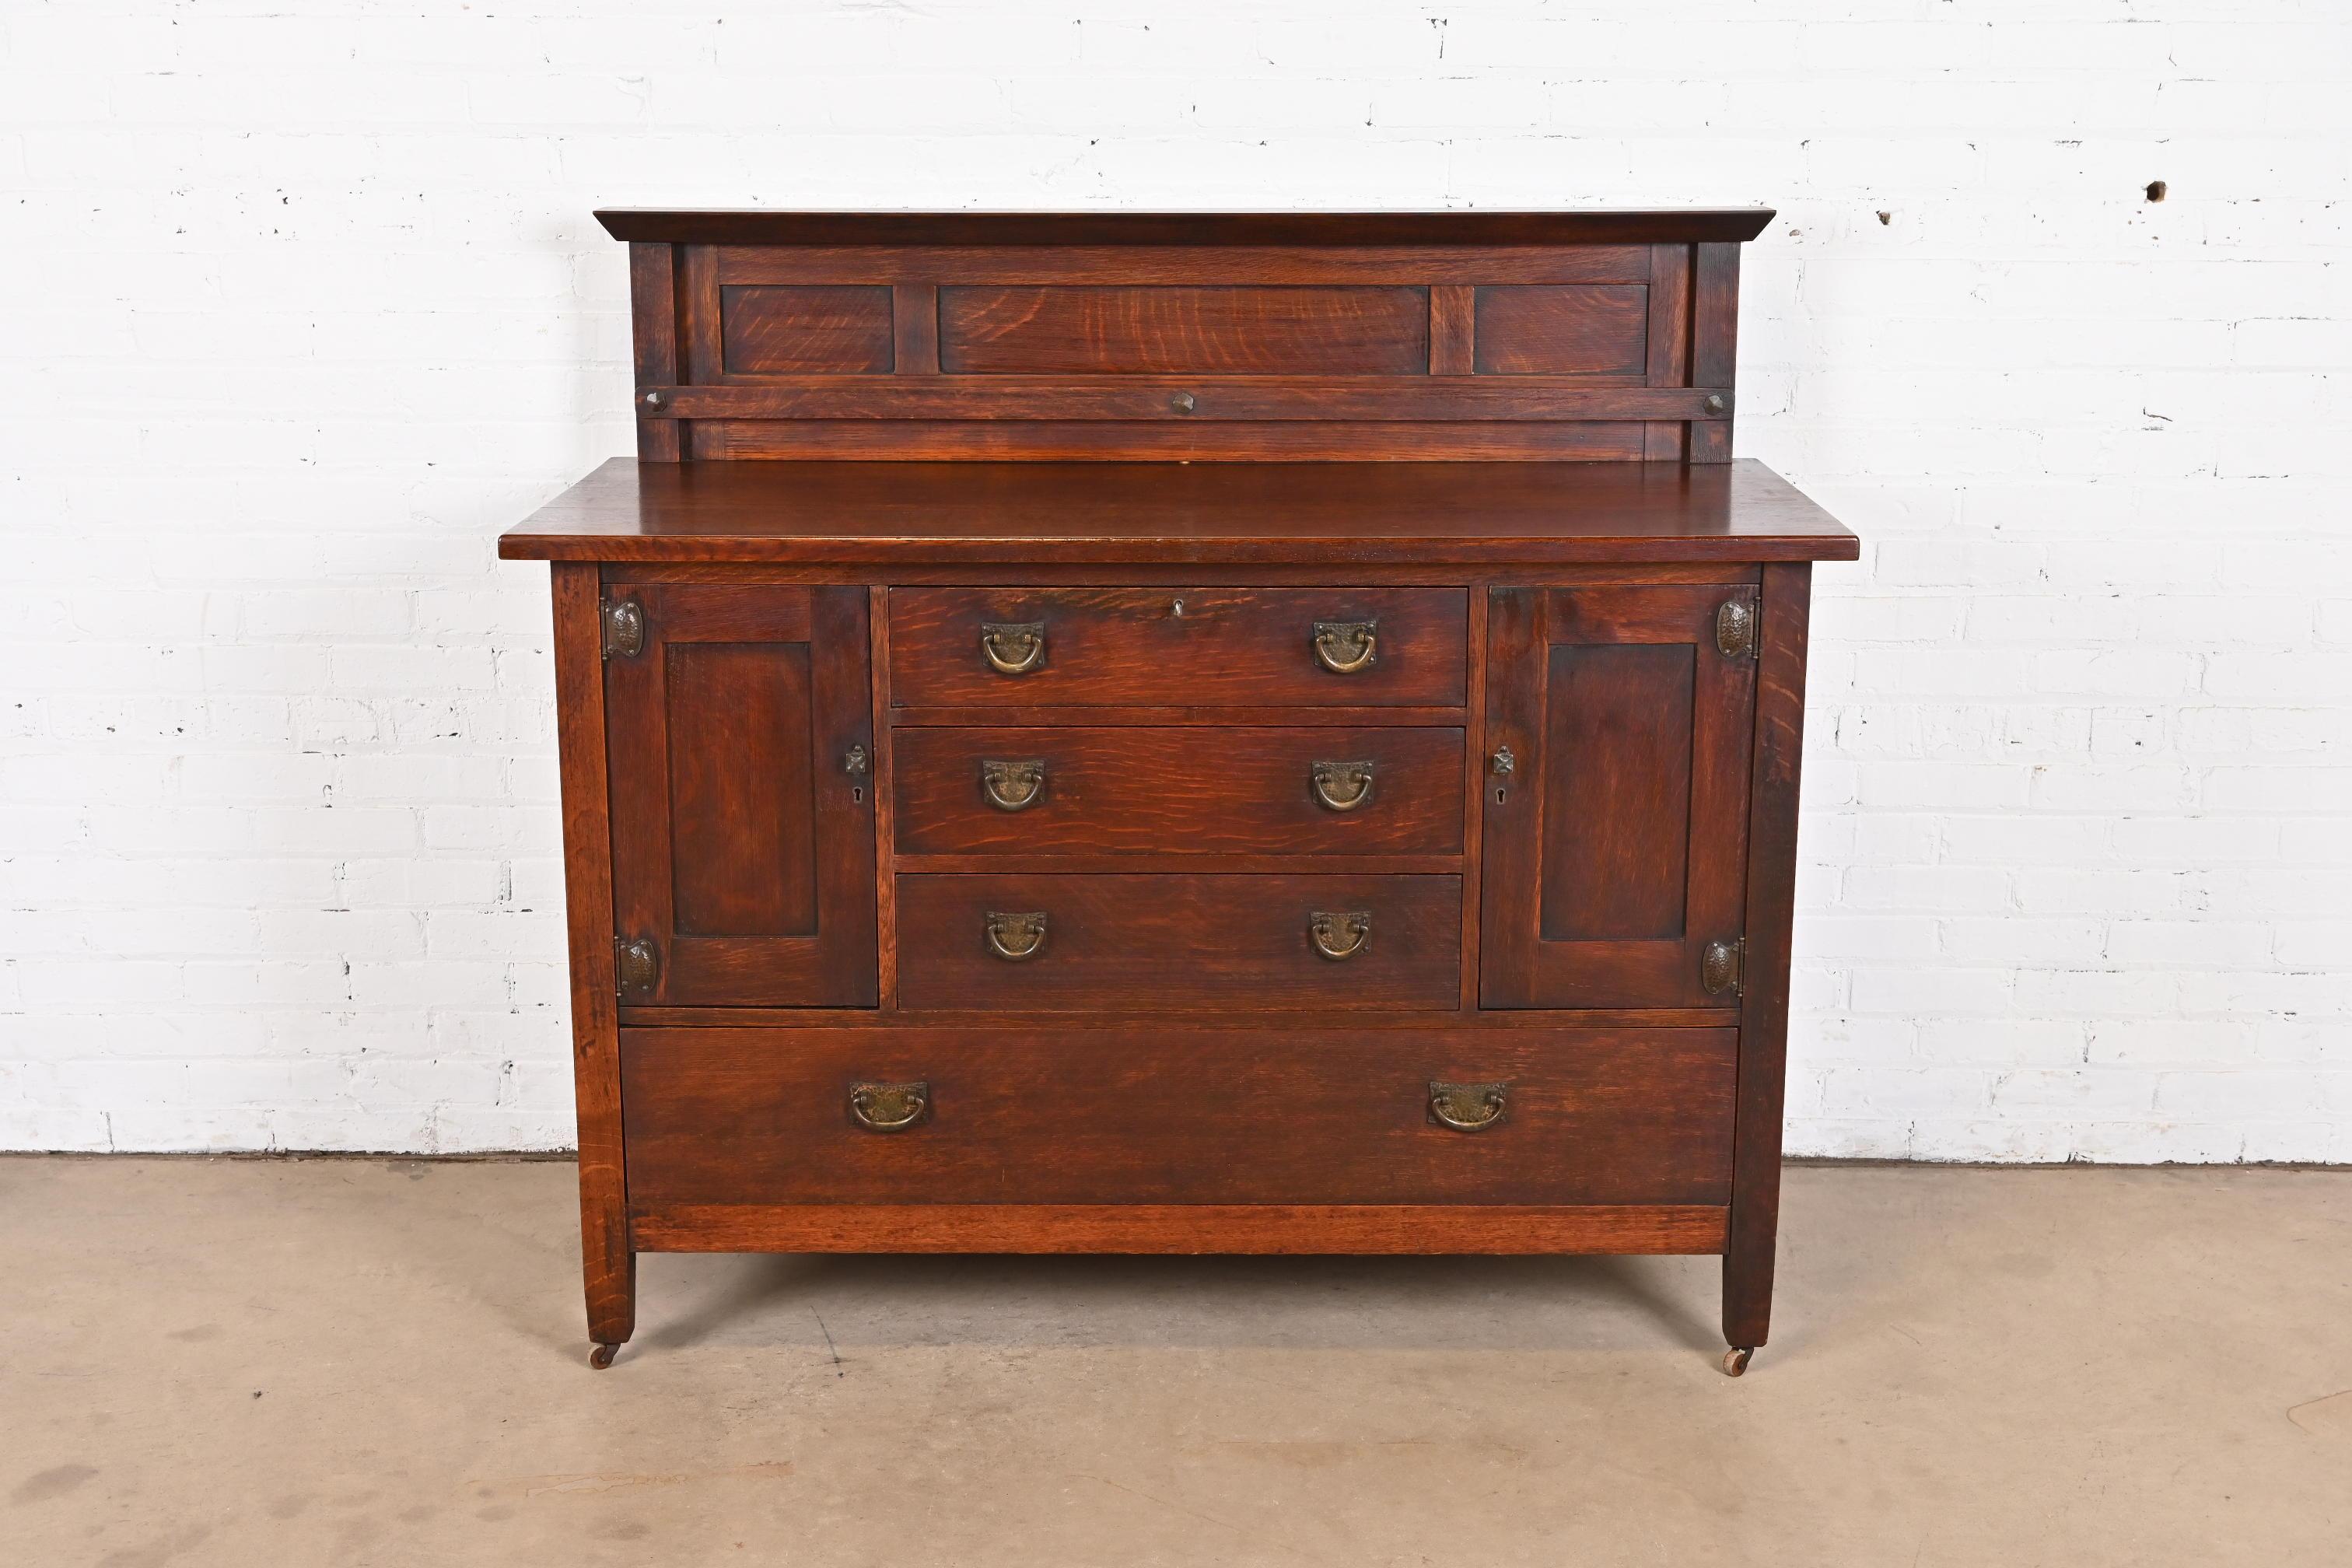 An exceptional antique Mission or Arts & Crafts sideboard, credenza, or bar cabinet with plate rack

By Stickley Brothers

USA, Circa 1900

Beautiful quarter sawn oak, with original hammered copper hardware.

Measures: 54